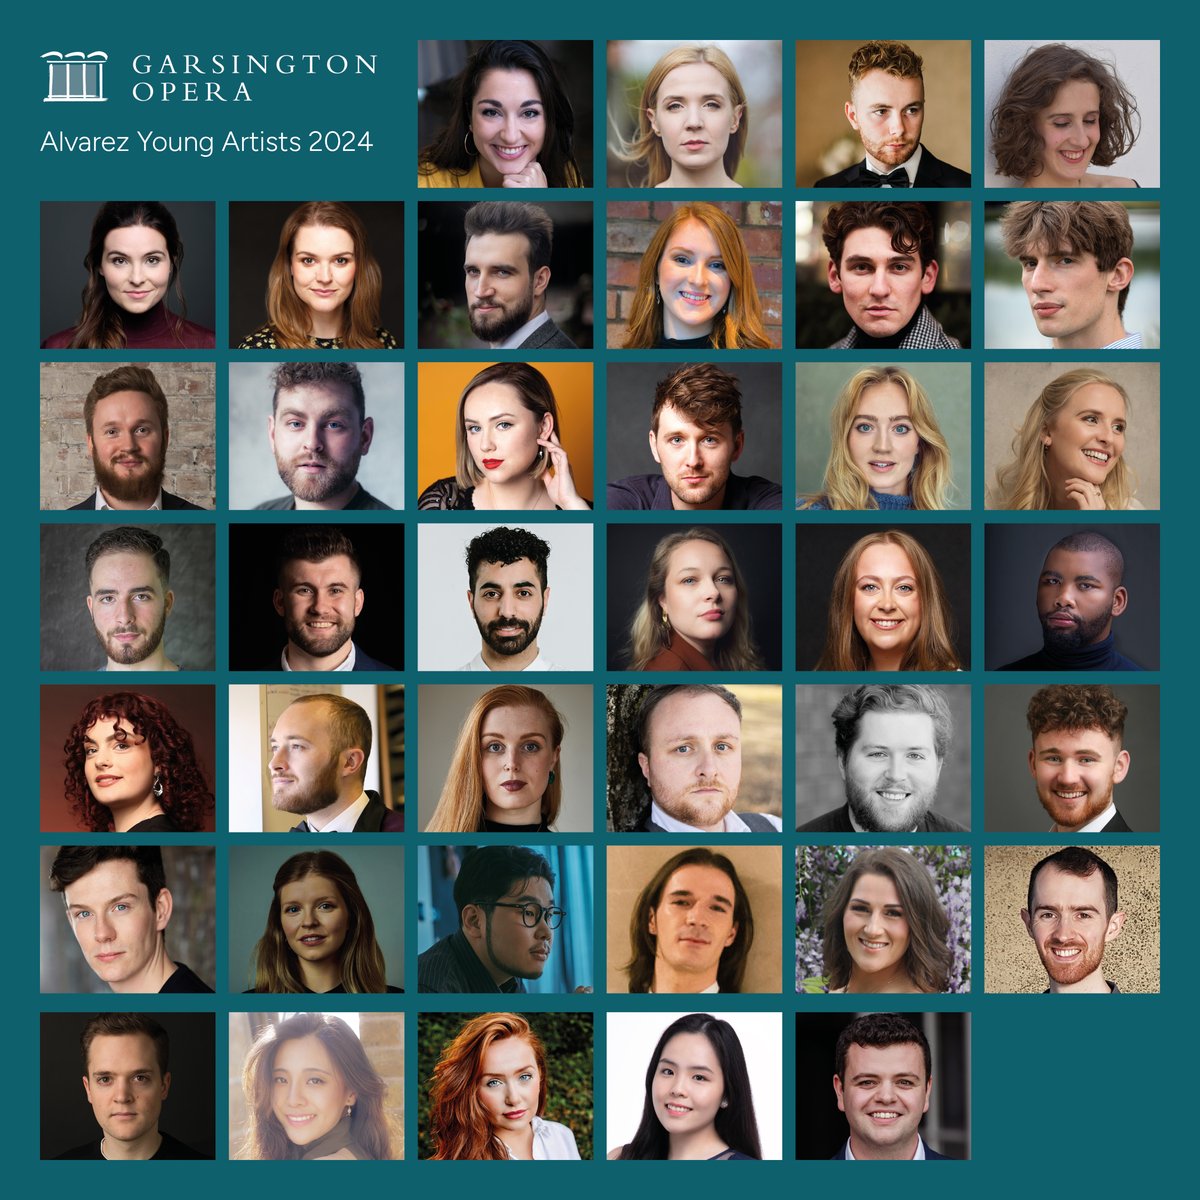 Welcome to our 2024 Alvarez Young Artists 🎉 We're delighted to reveal our 2024 cohort of young artists who will be performing across our five operas in a range of capacities, as principals, understudying principal roles, and making up our choruses. garsingtonopera.org/2024-young-art…